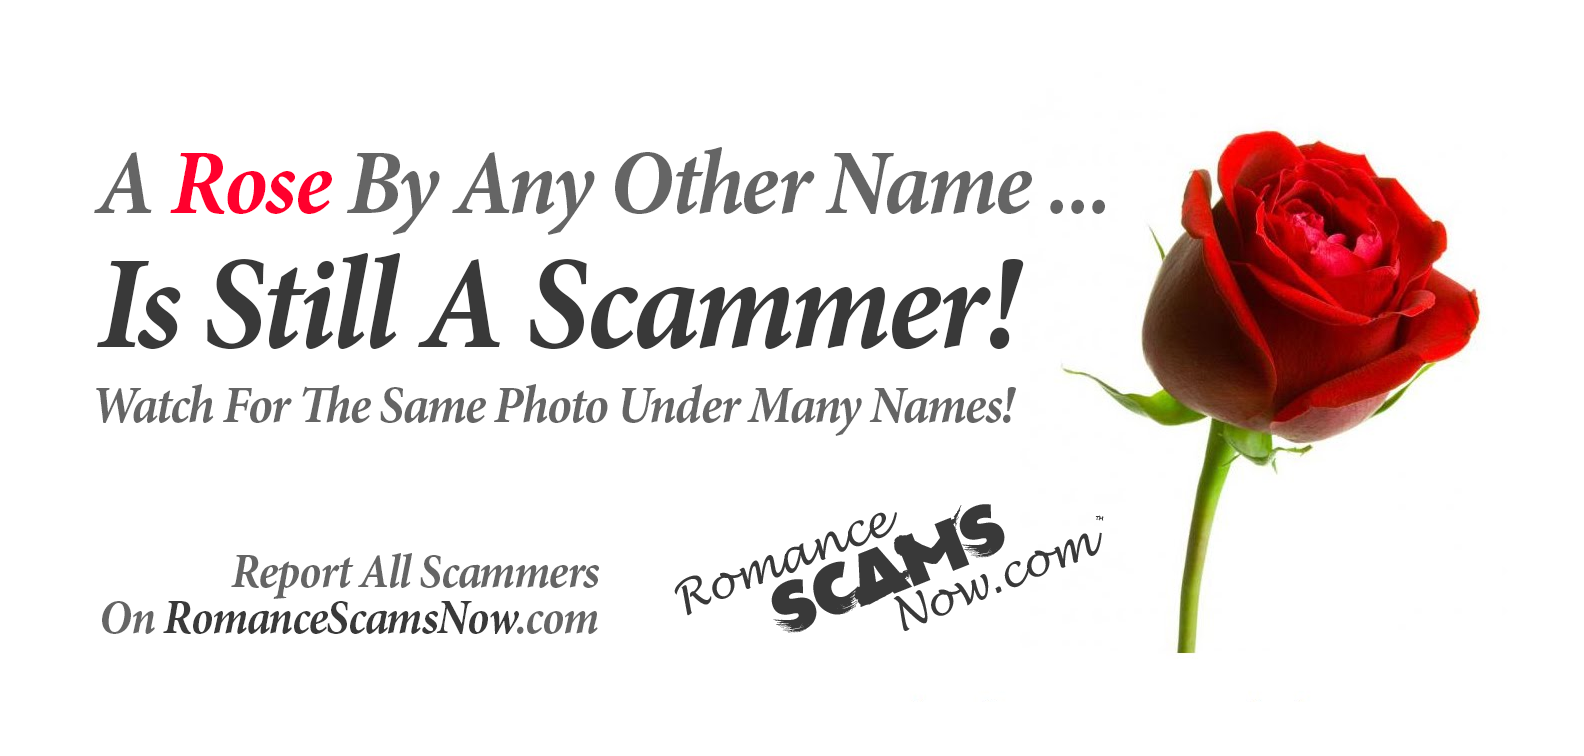 SCARS ™ / RSN™ Anti-Scam Poster 7